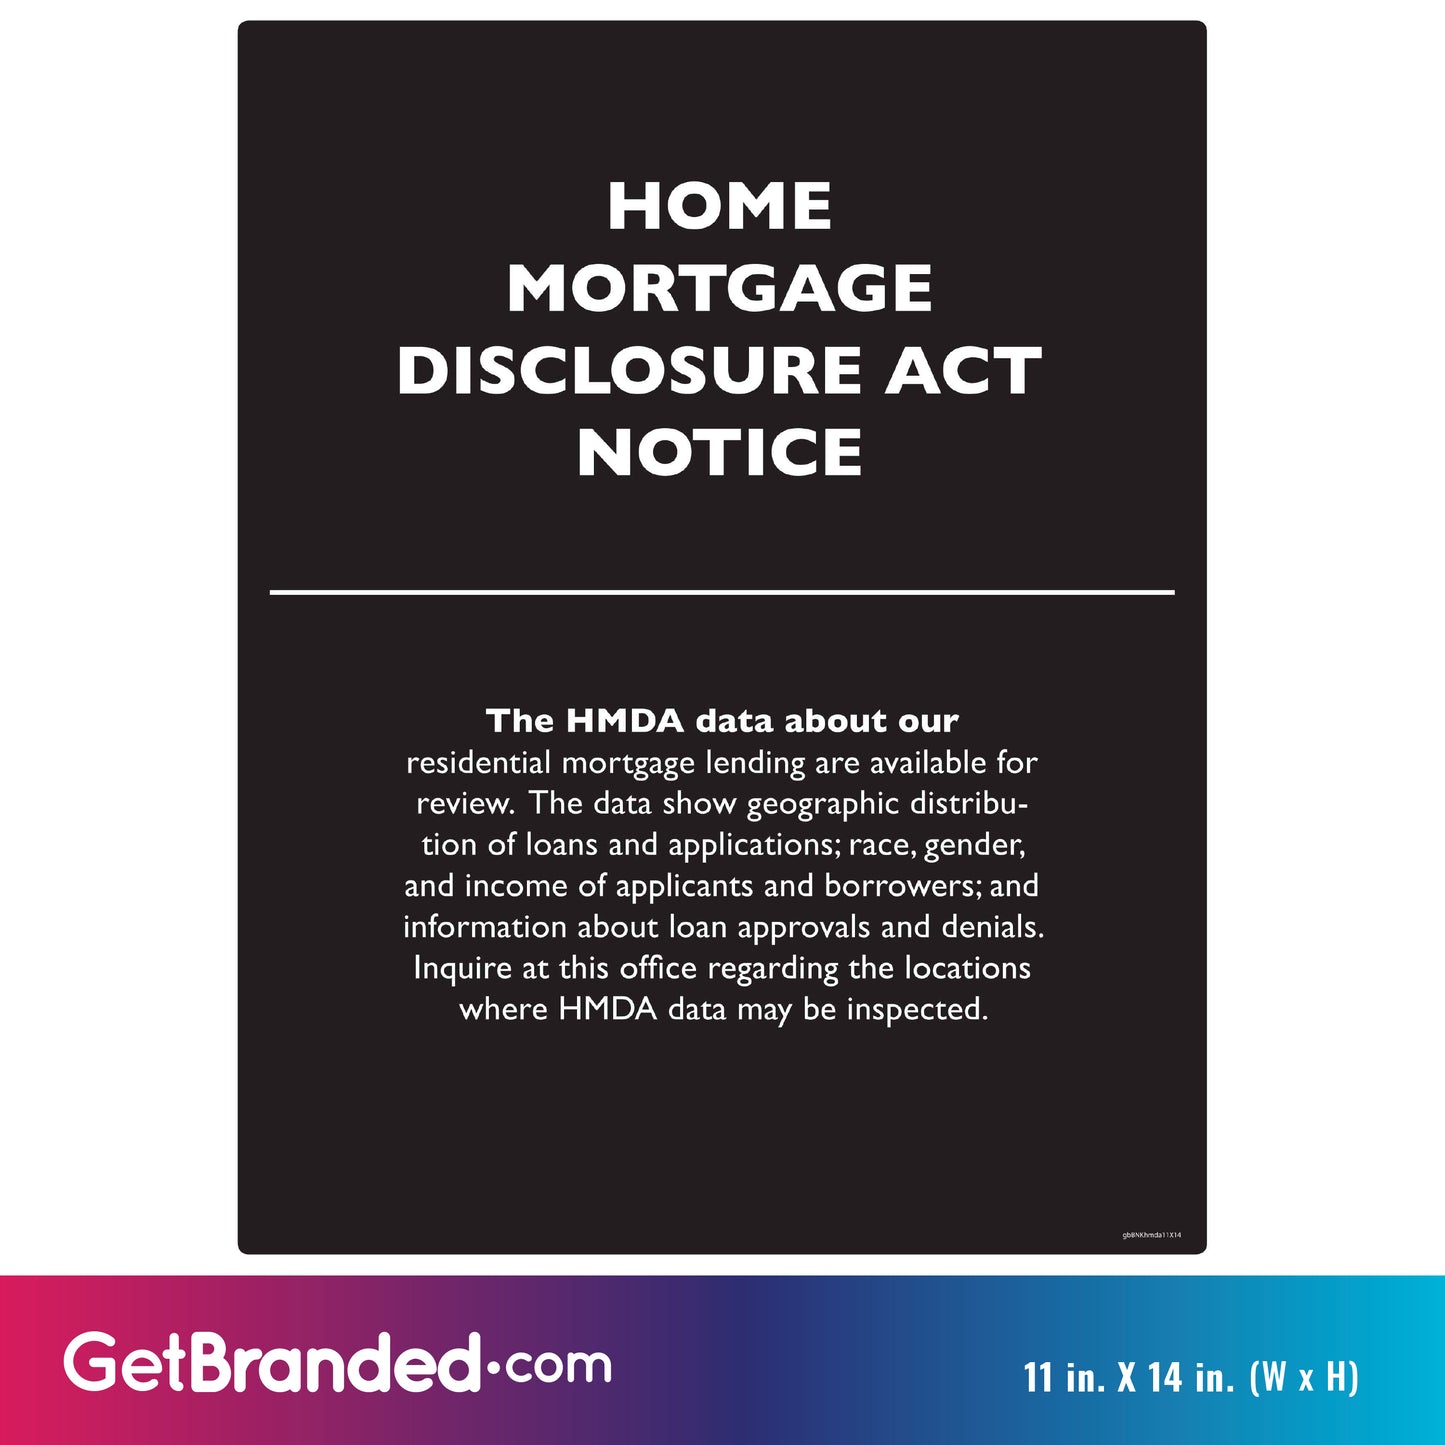 Home Mortgage Disclosure Act Notice Decal size guide.